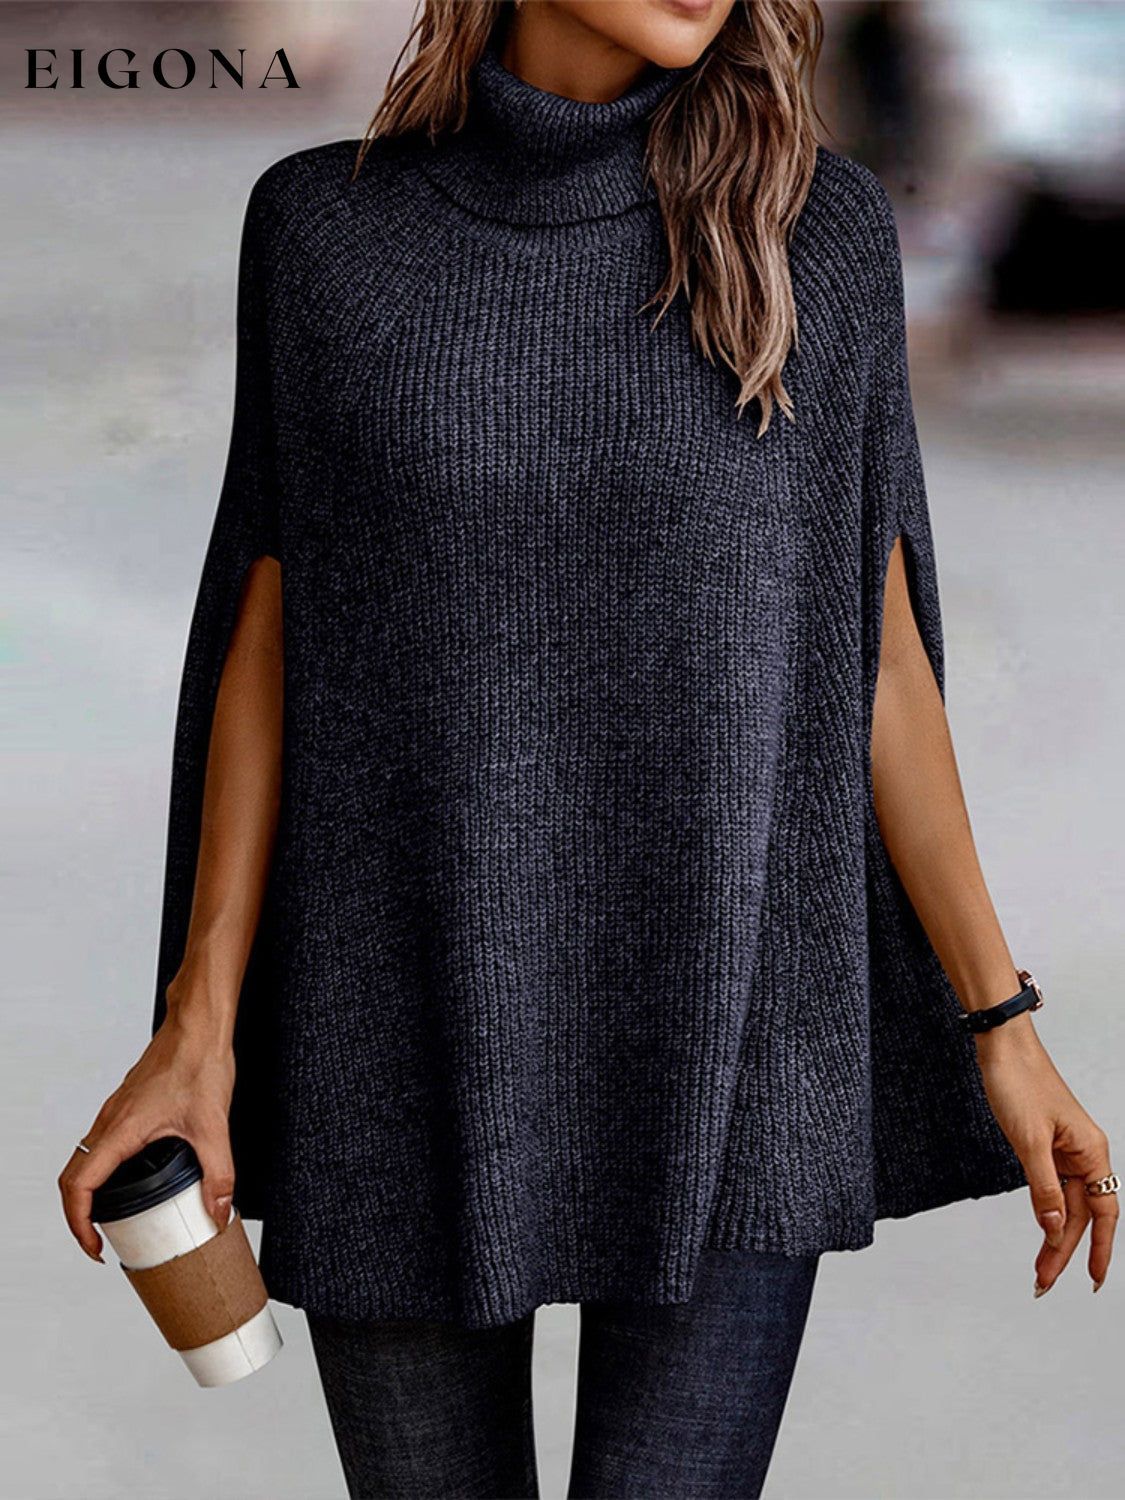 Turtleneck Dolman Sleeve Poncho Fashion Sweater Navy clothes long sleeve Romantichut Ship From Overseas Shipping Delay 09/29/2023 - 10/04/2023 Sweater sweaters turtleneck